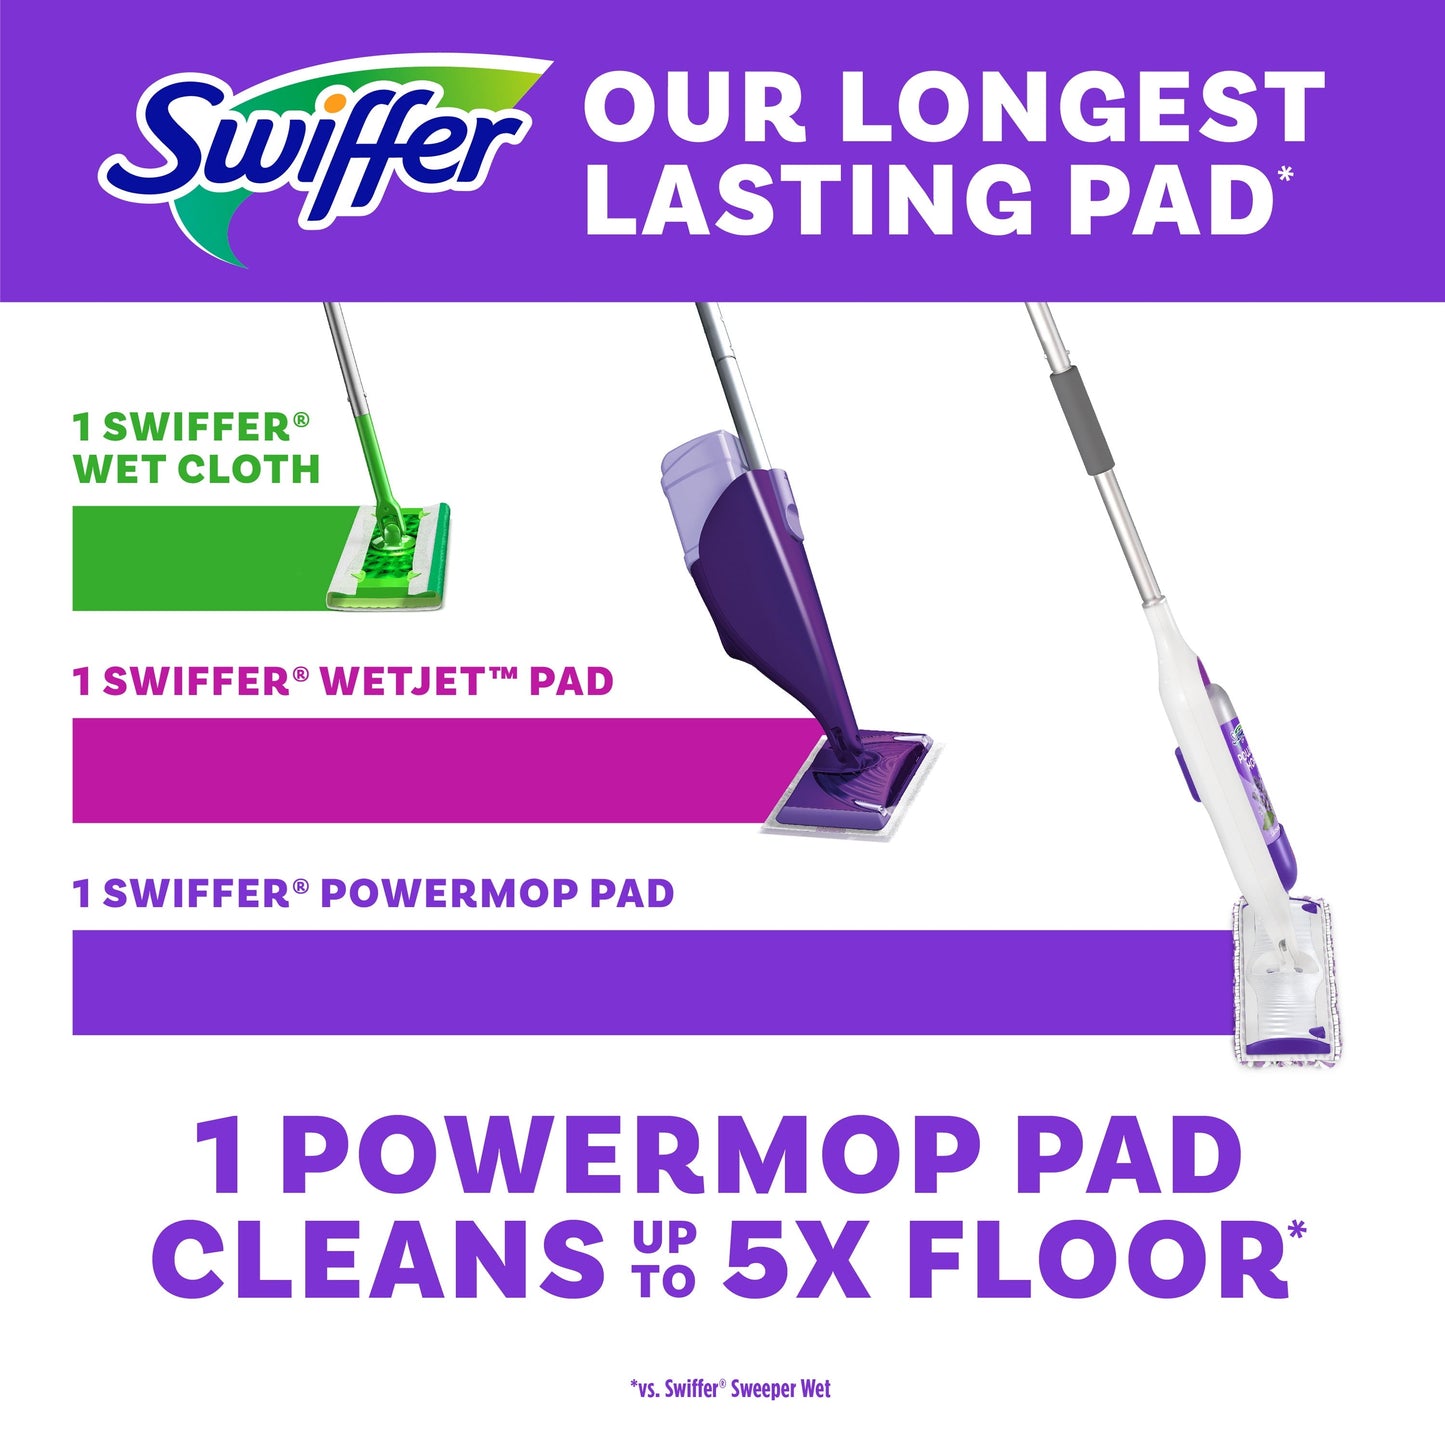 Swiffer PowerMop Multi-Surface Mopping Pad Refills, 5 Count Mop Heads